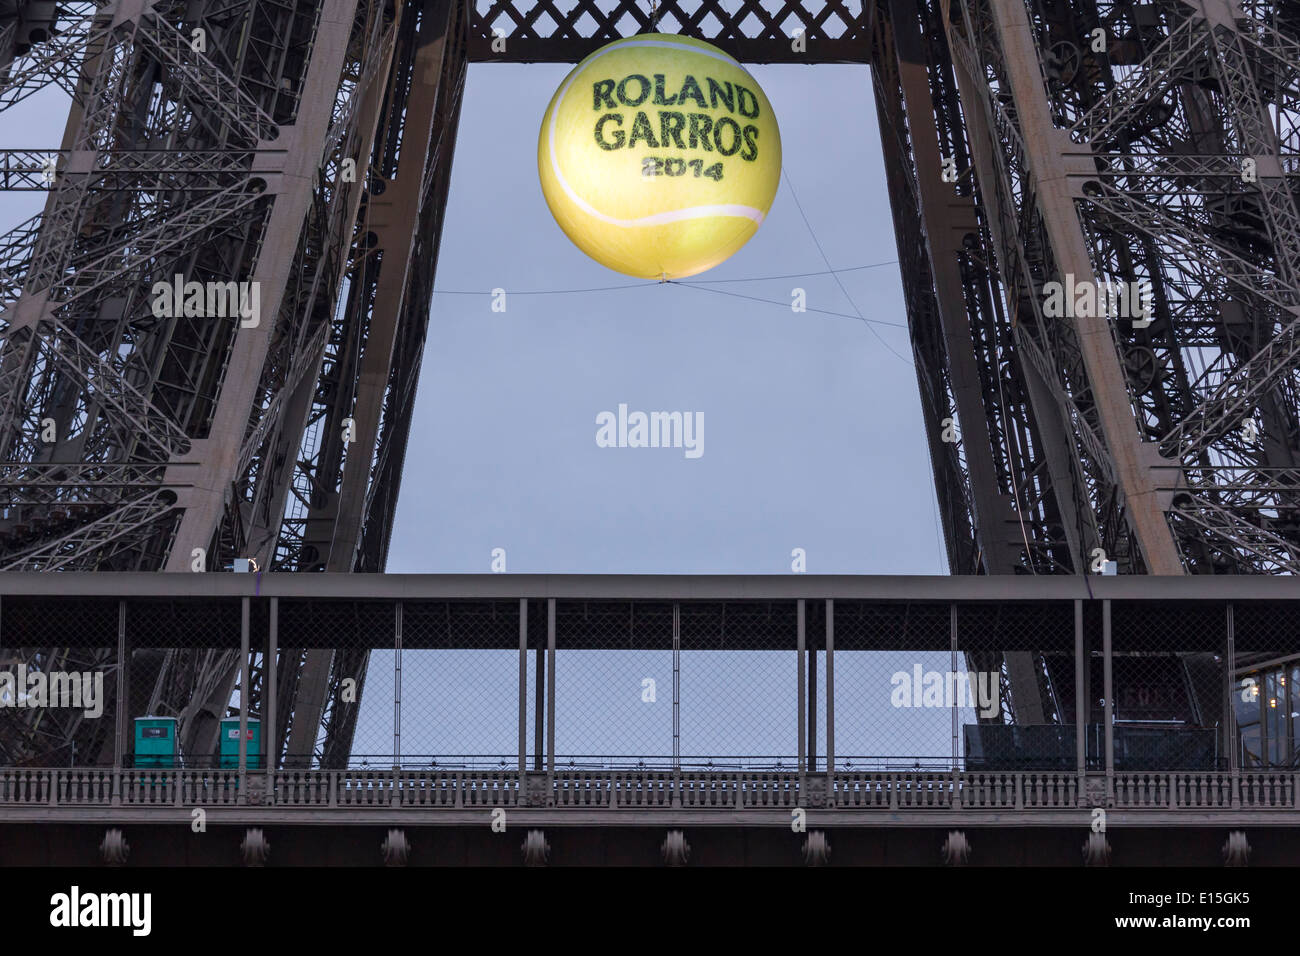 Eiffel Tower at sunset with a giant, illuminated tennis ball hanging over the first platform to promote the 2014 French Open. Stock Photo